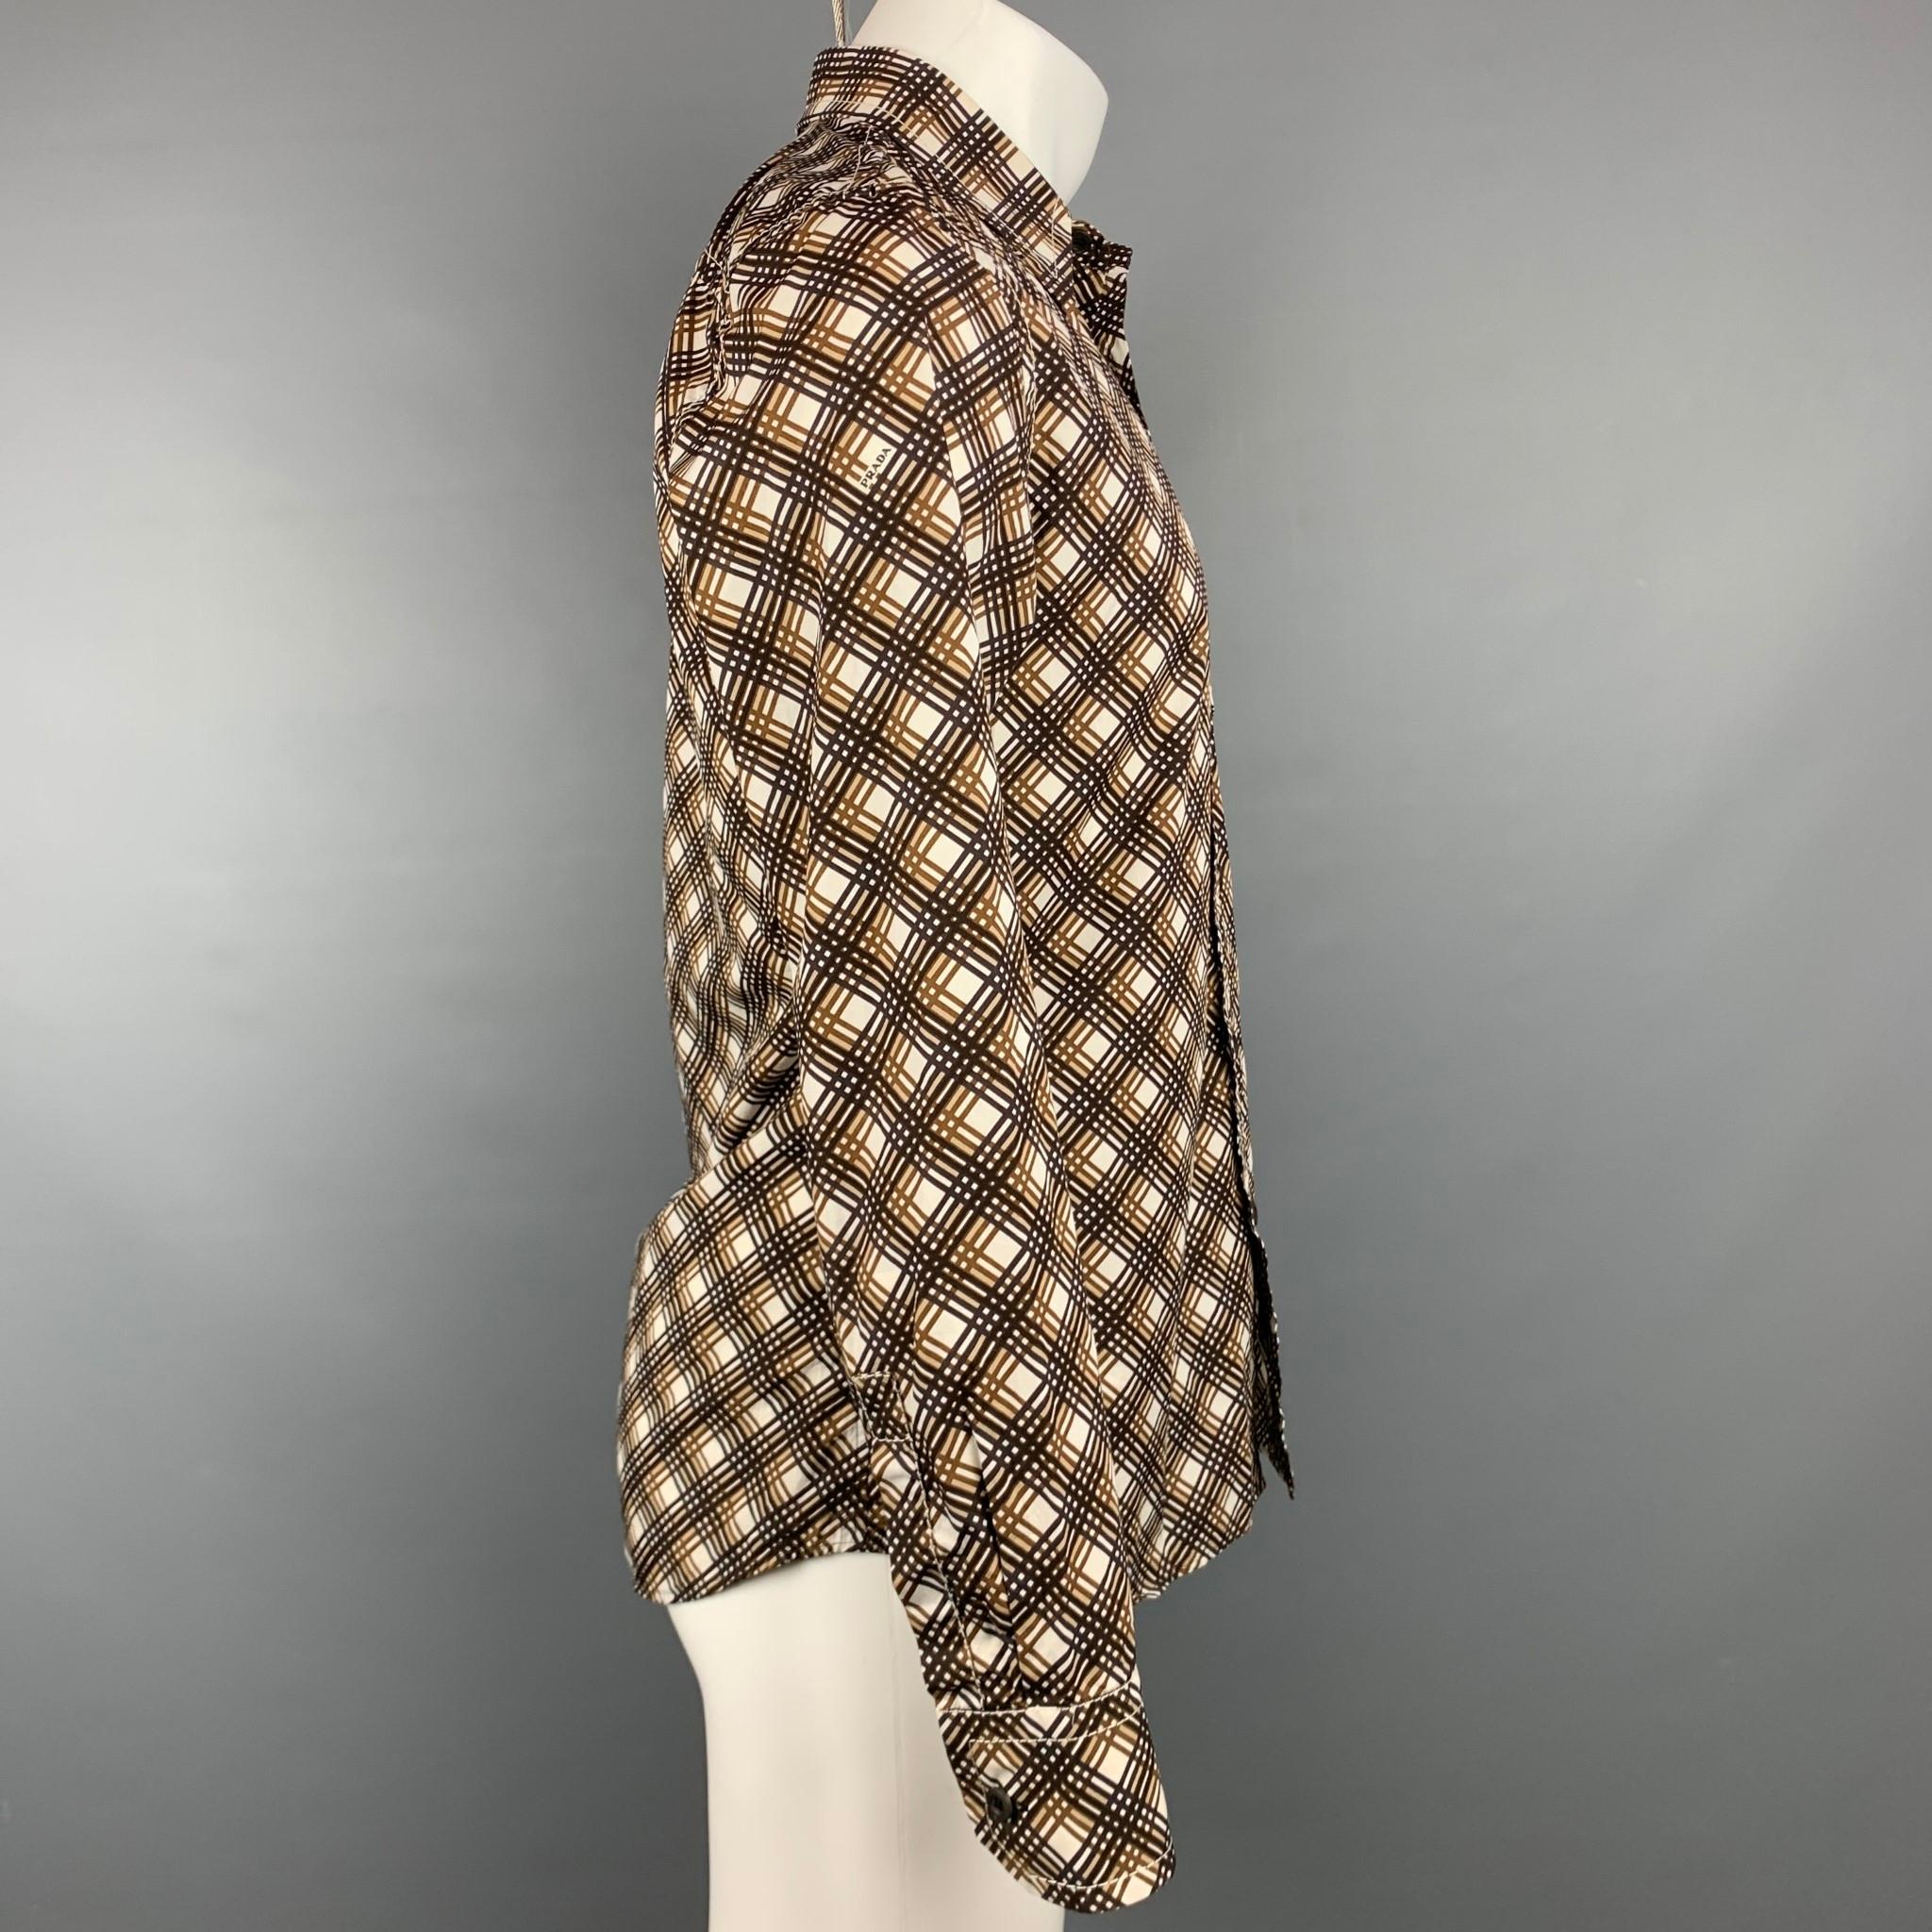 PRADA long sleeve shirt comes in a brown & white plaid cotton featuring a button up style, patch pocket, contrast stitching, and a spread collar. Made in Italy.

Very Good Pre-Owned Condition.
Marked: 40/15

Measurements:

Shoulder: 17 in.
Chest: 42